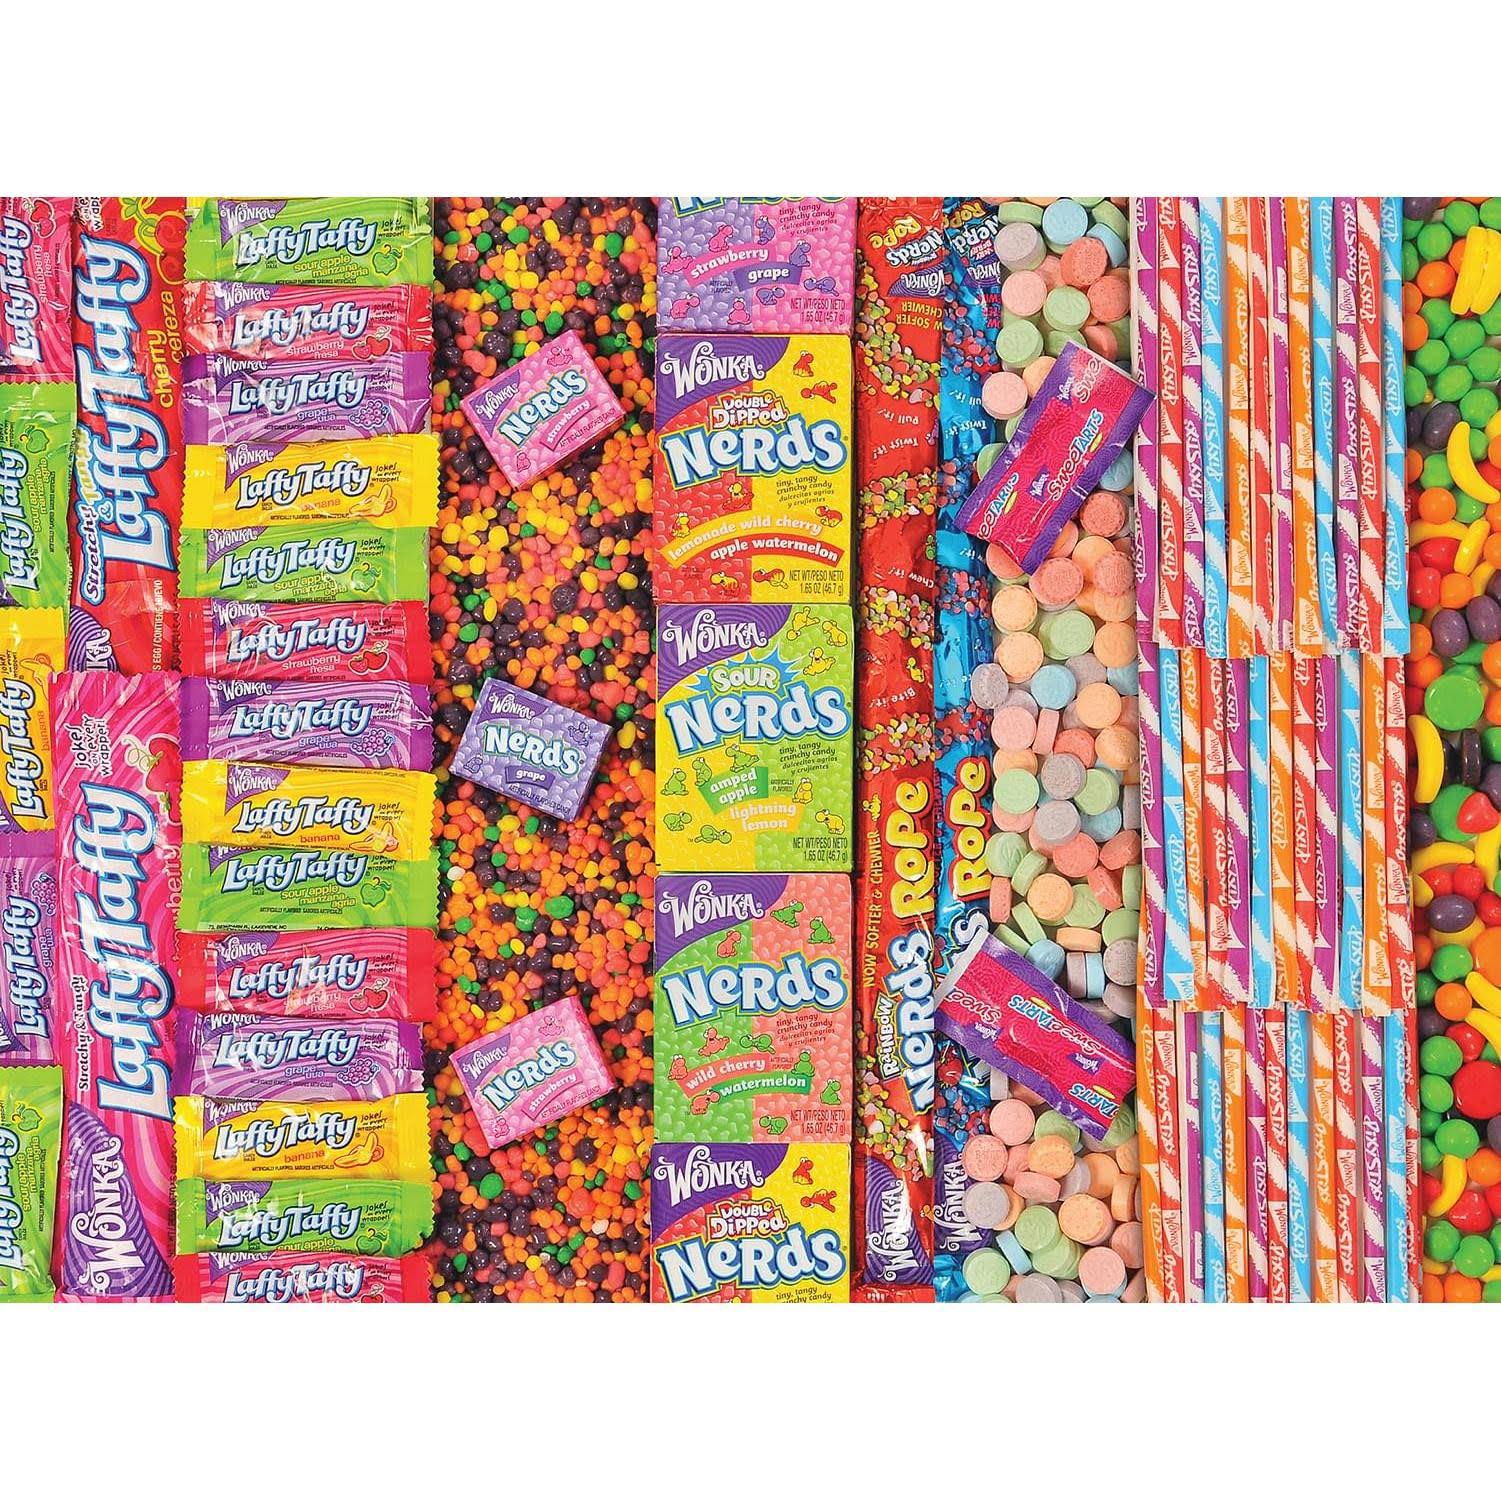 Masterpieces Inc Nerds for Life 500 Piece Jigsaw Puzzle